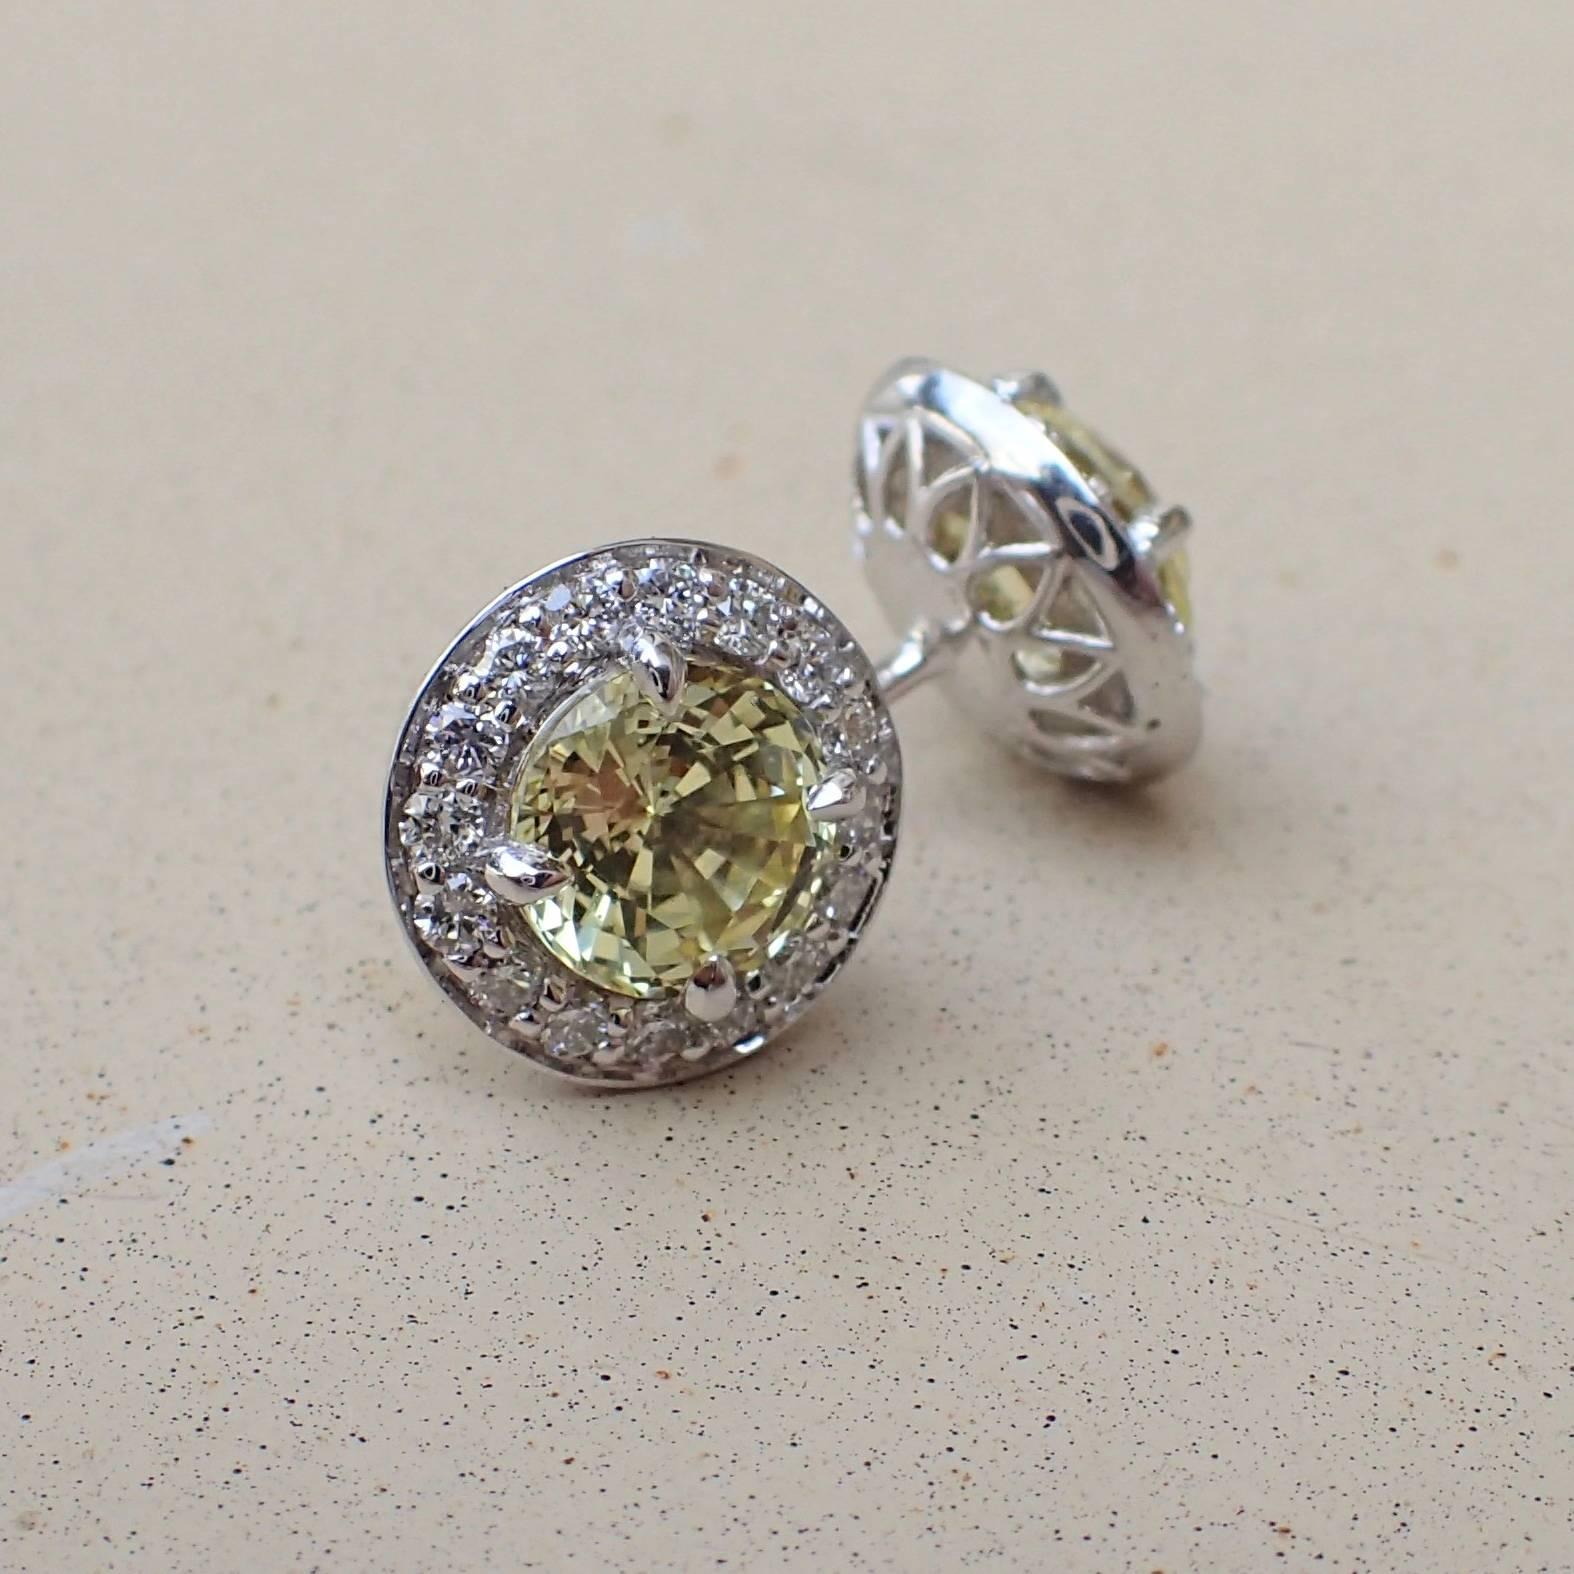 Contemporary 18K Earrings: 2.28 carats Chatham-Created Yellow Sapphire & 0.38 carats Diamond